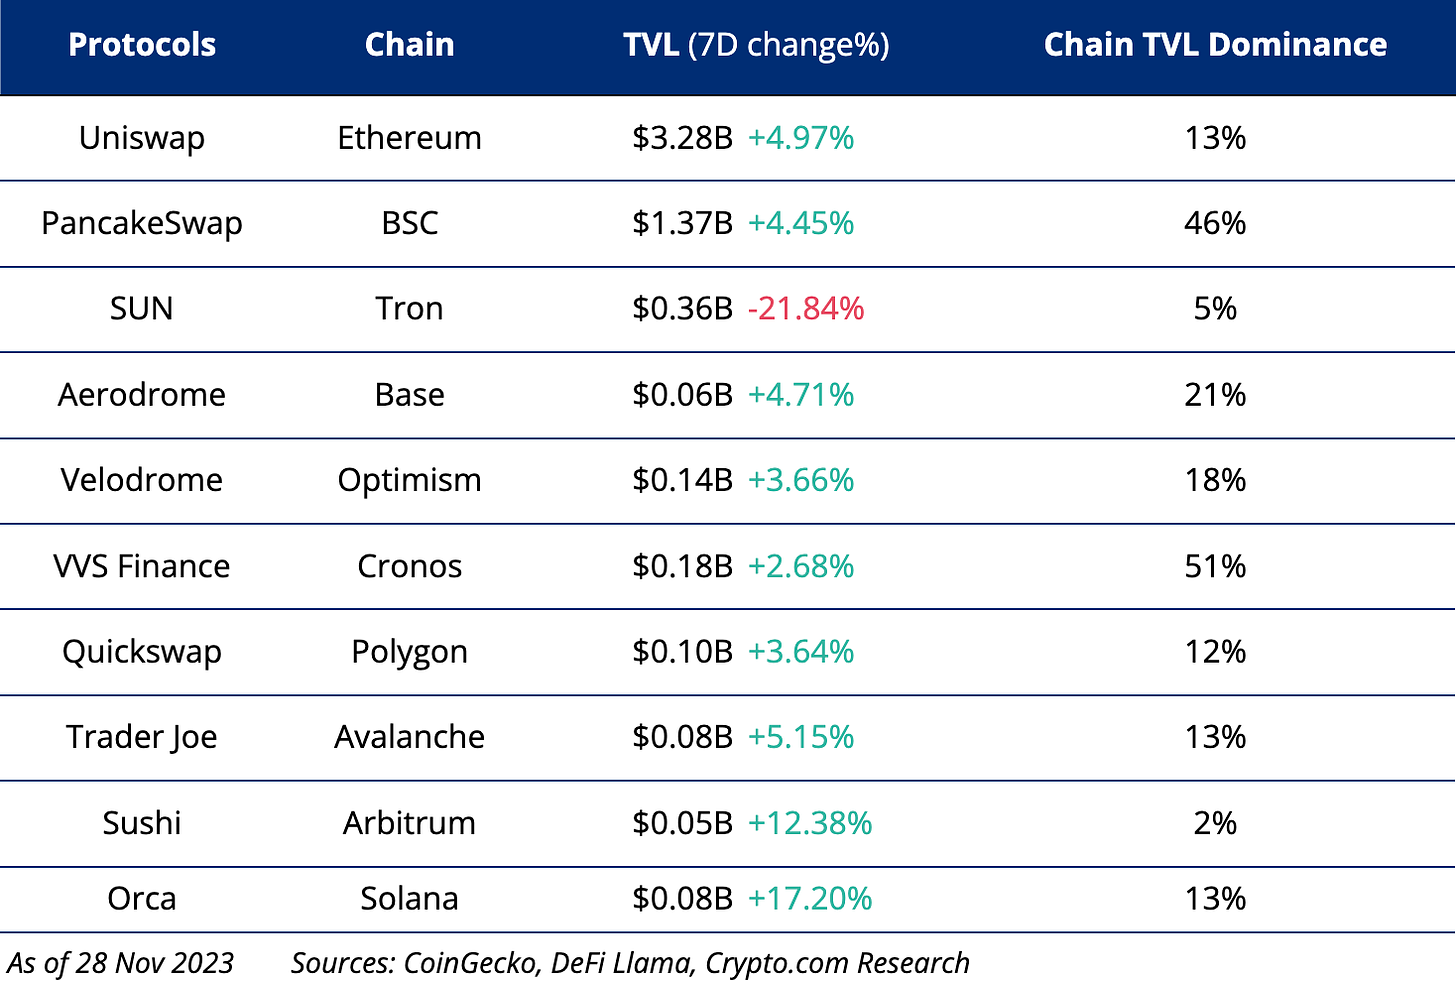 Crypto.com Top Dex By Chain